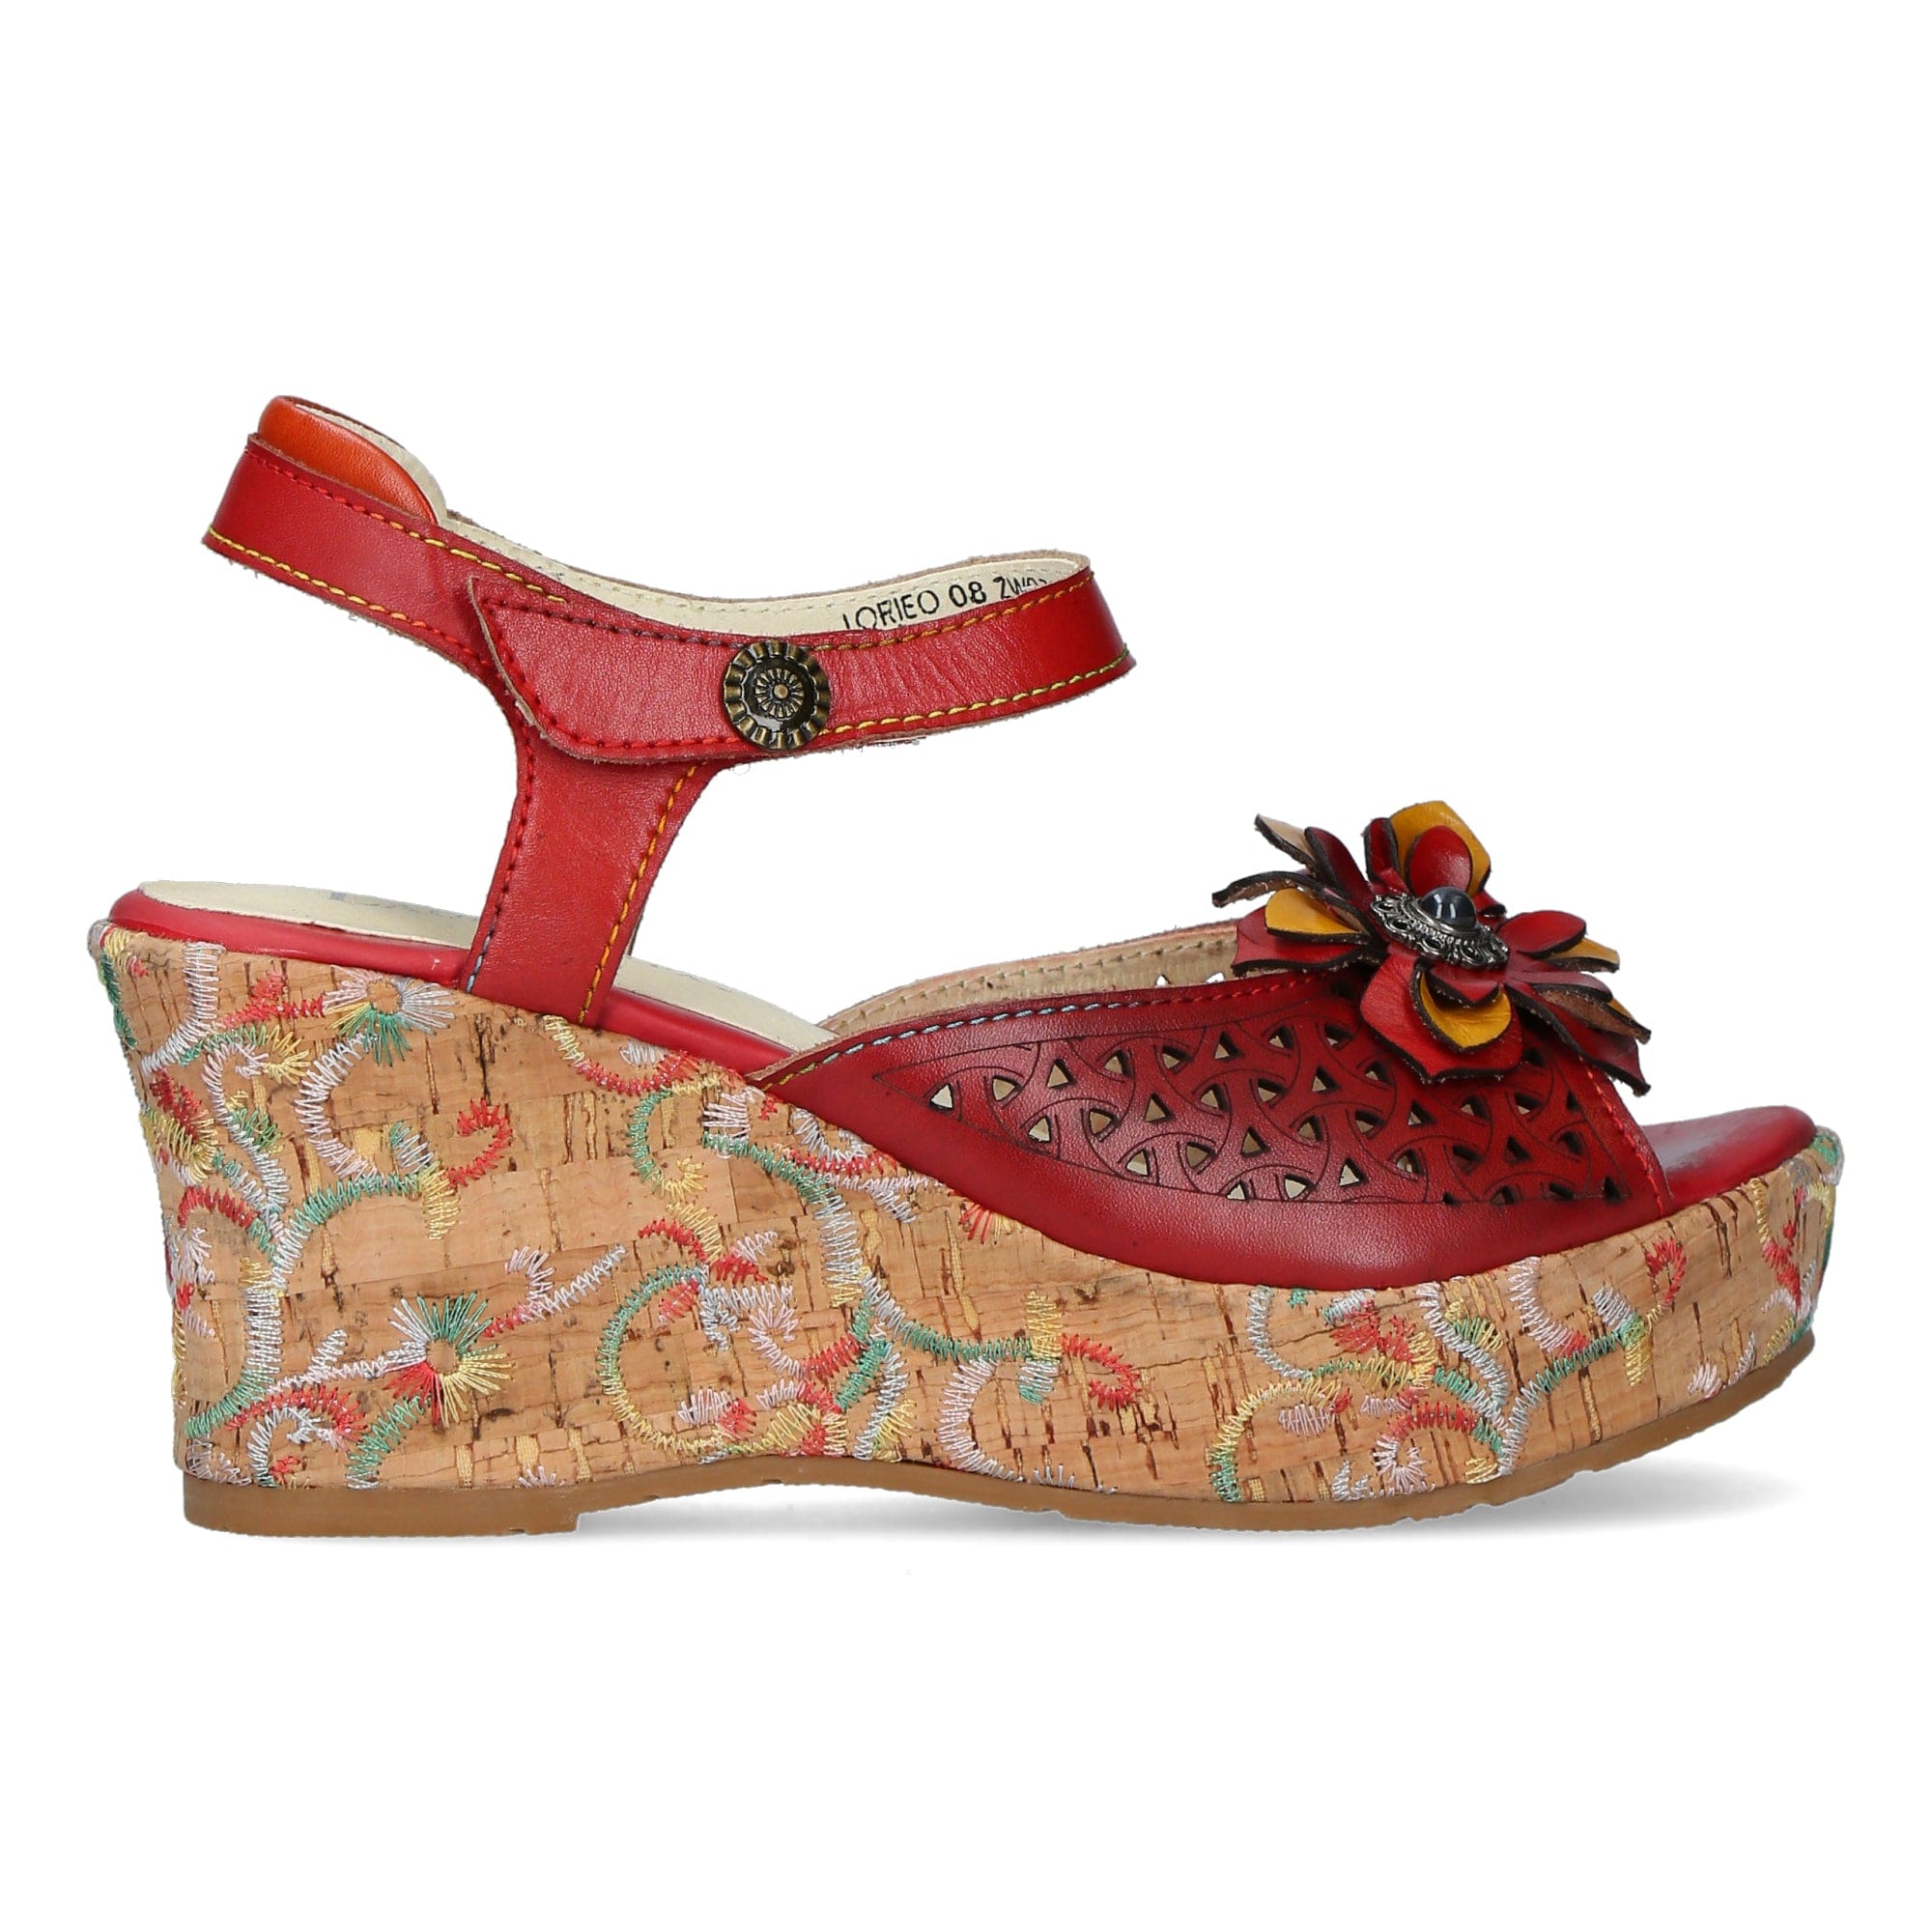 Chaussures LORIEO 08 - 35 / Rouge - Sandale